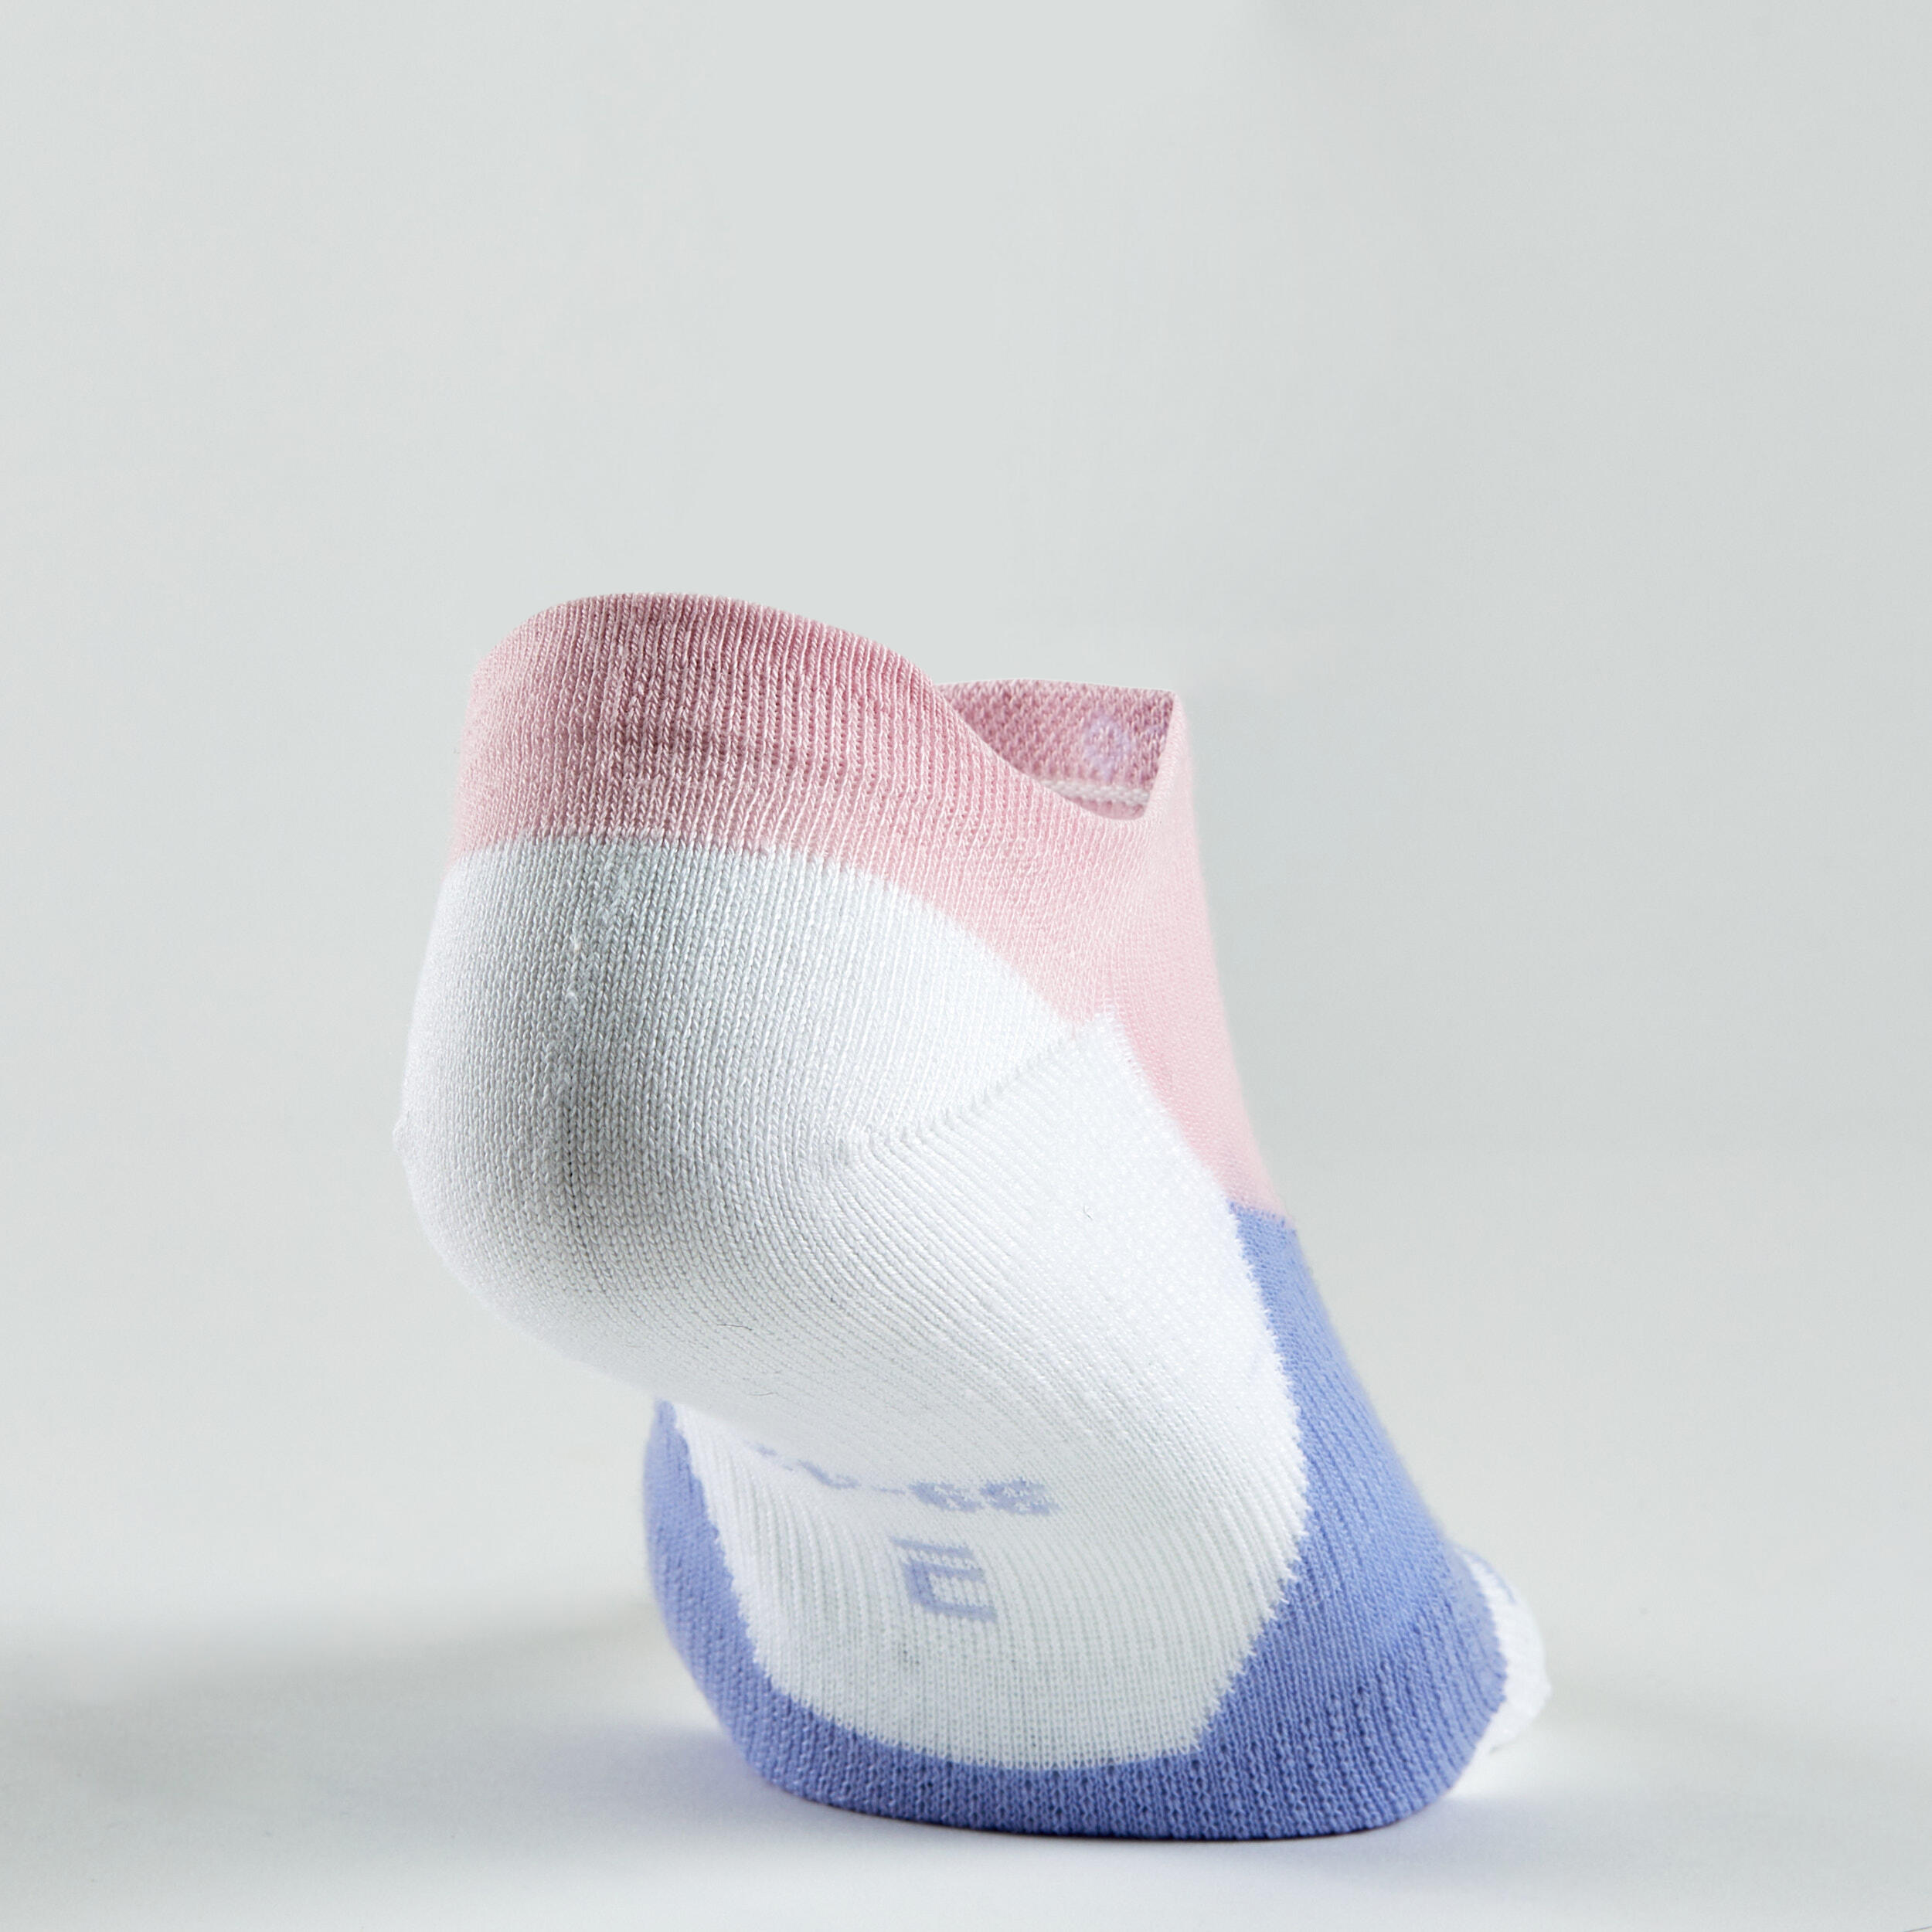 Low Sports Socks RS 160 Tri-Pack - Colour Block/Pink 13/14